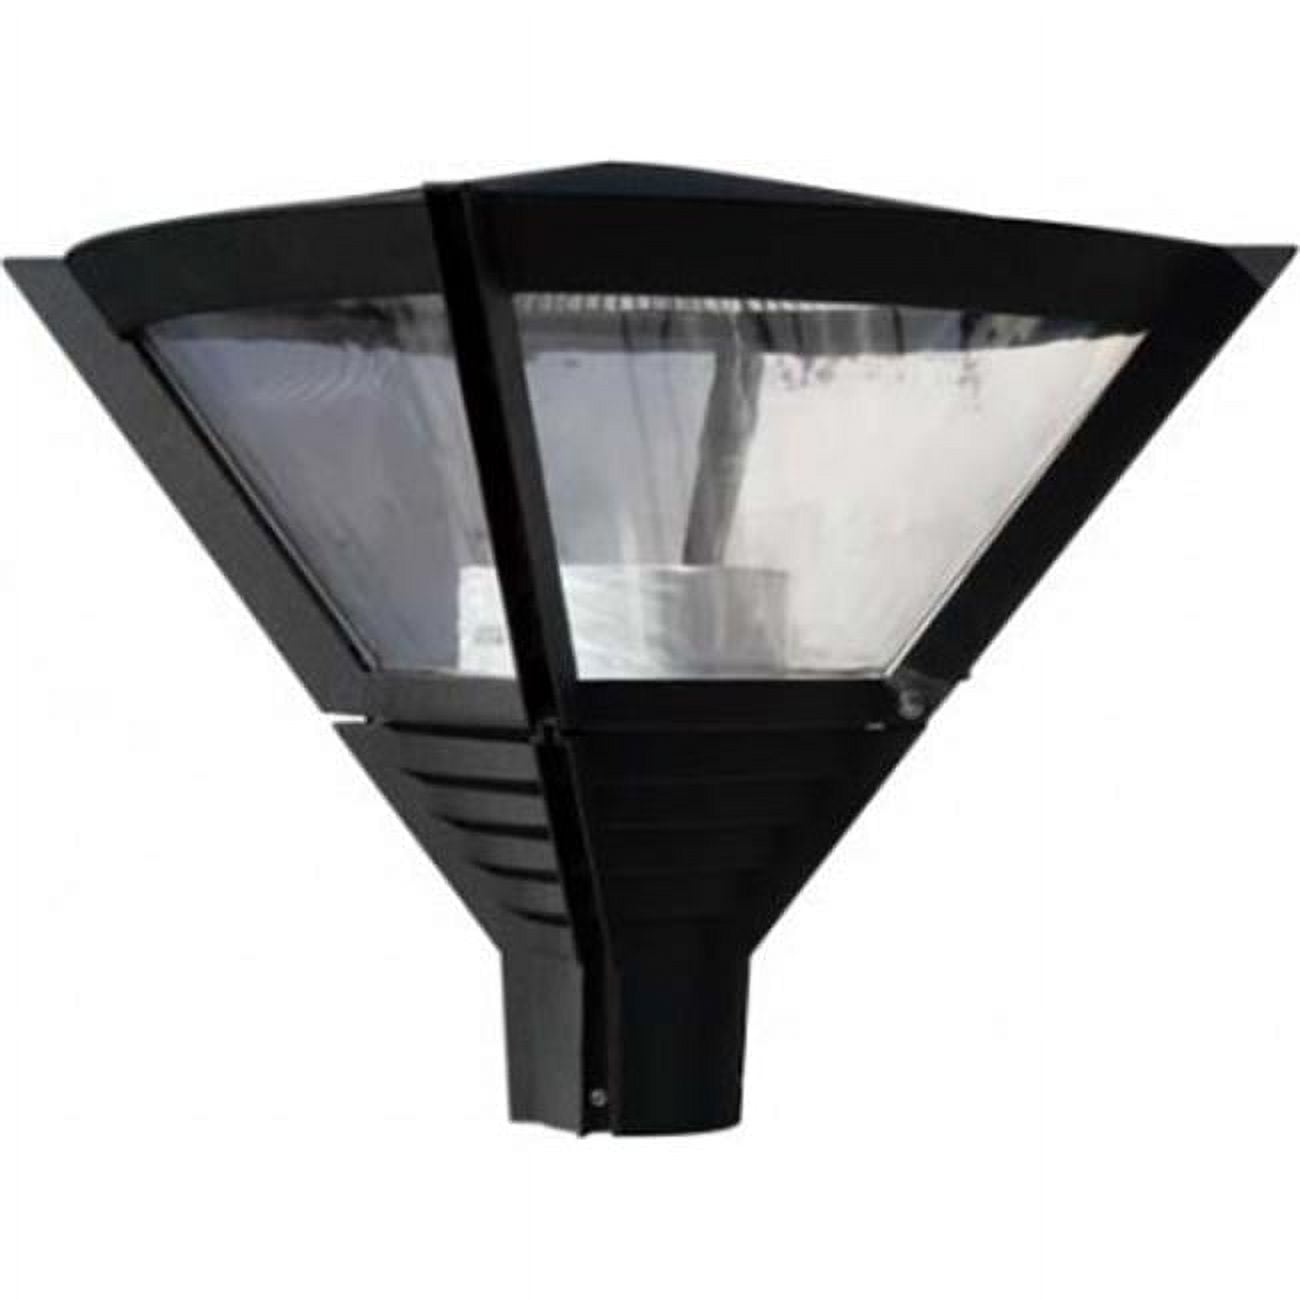 Picture of Dabmar Lighting GM563-B Powder Coated Cast Aluminum Architectural Post Top Light Fixture, Black - 20.75 x 20.75 x 20.75 in.